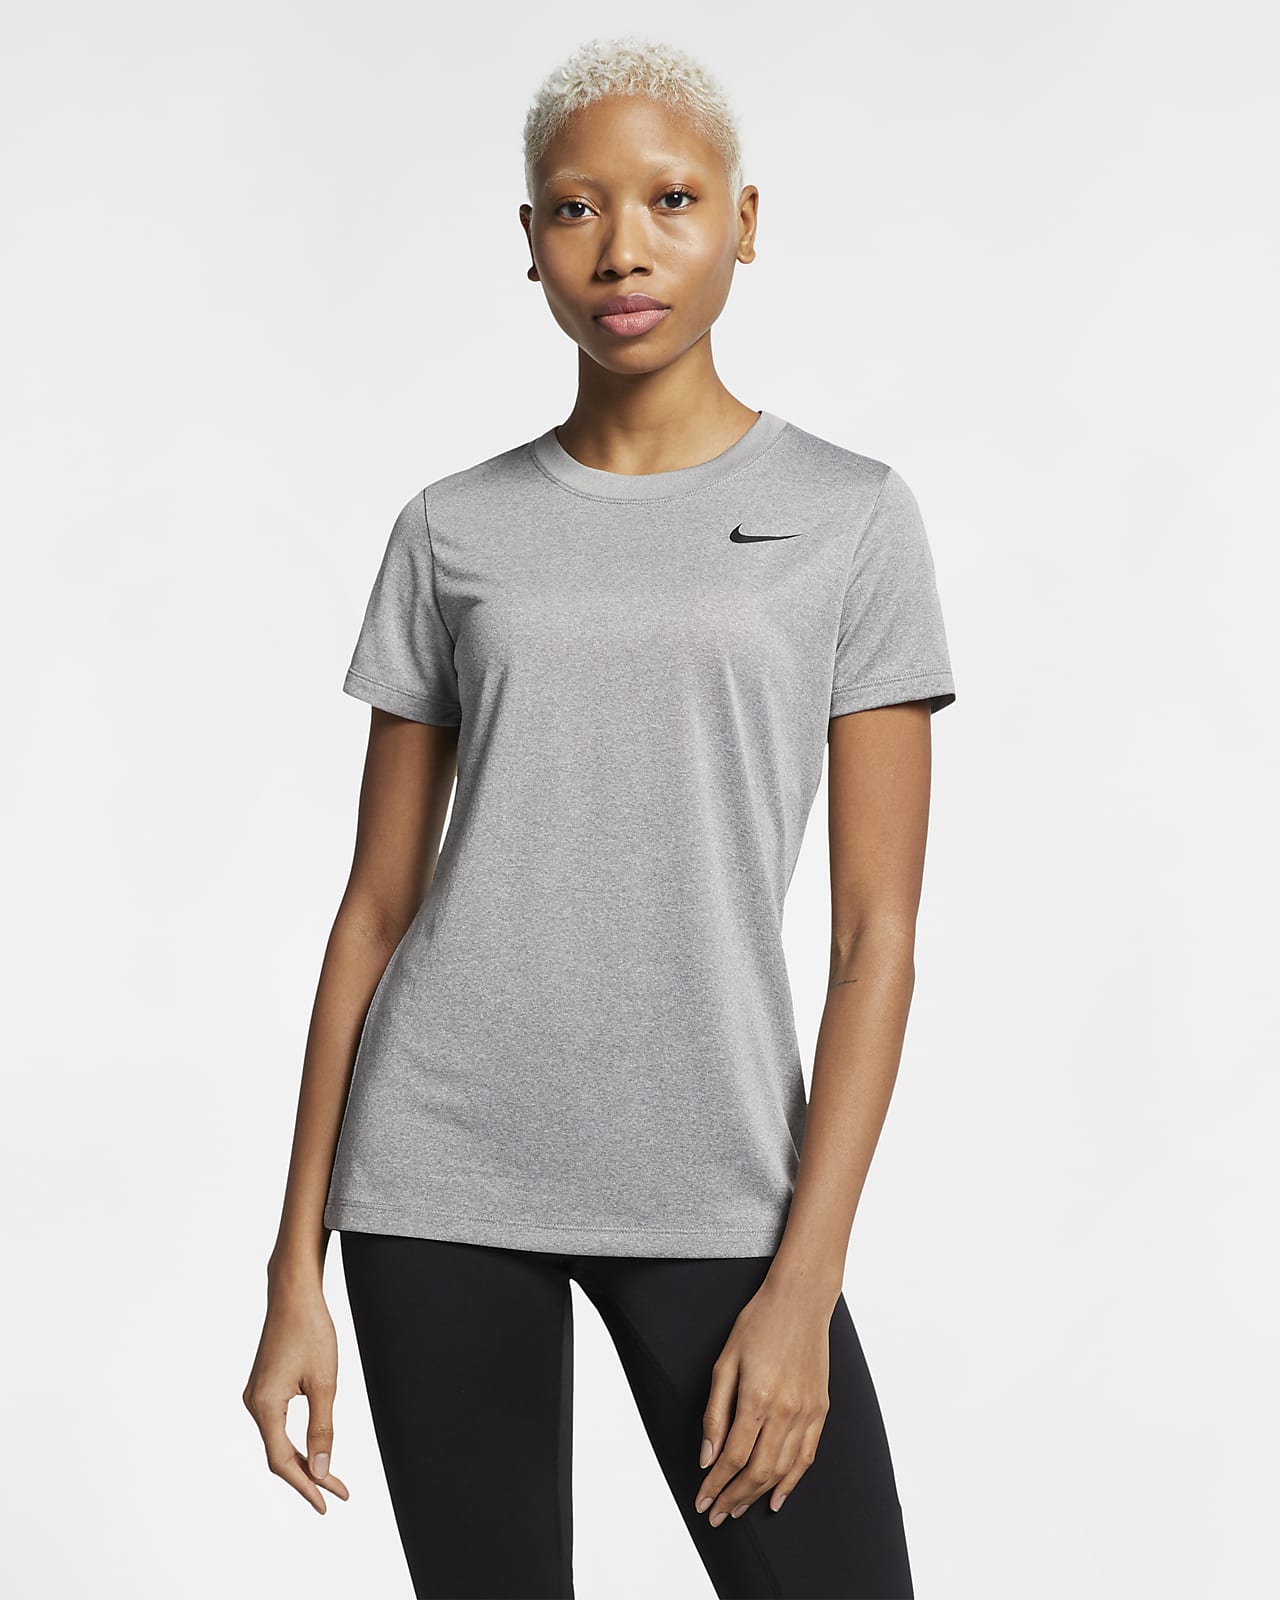 women's fitted nike shirt